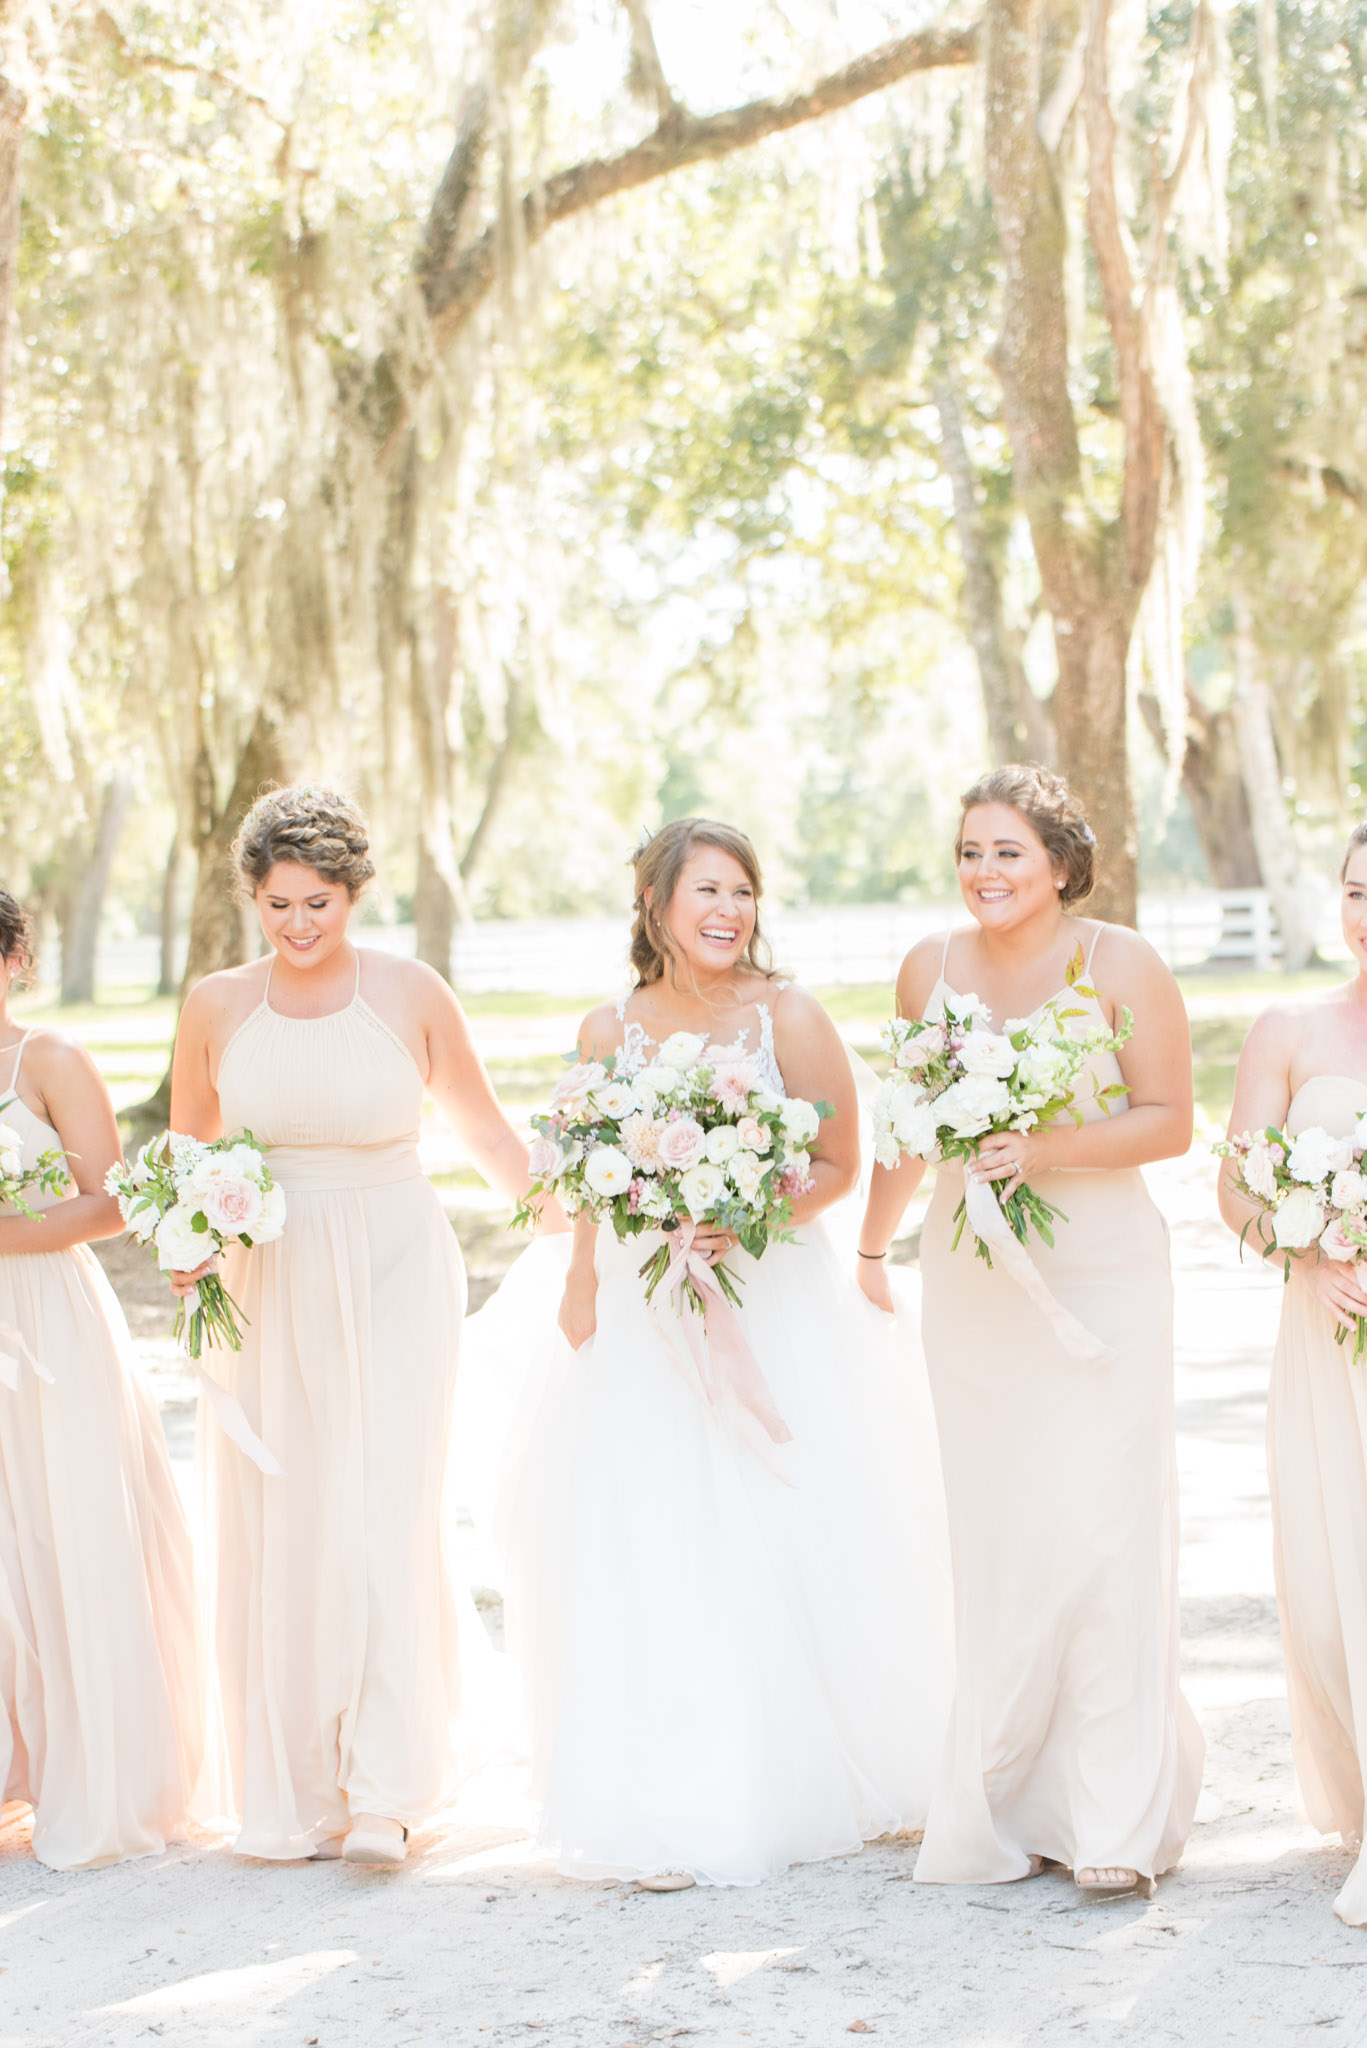 Bride laughs with bridesmaids.